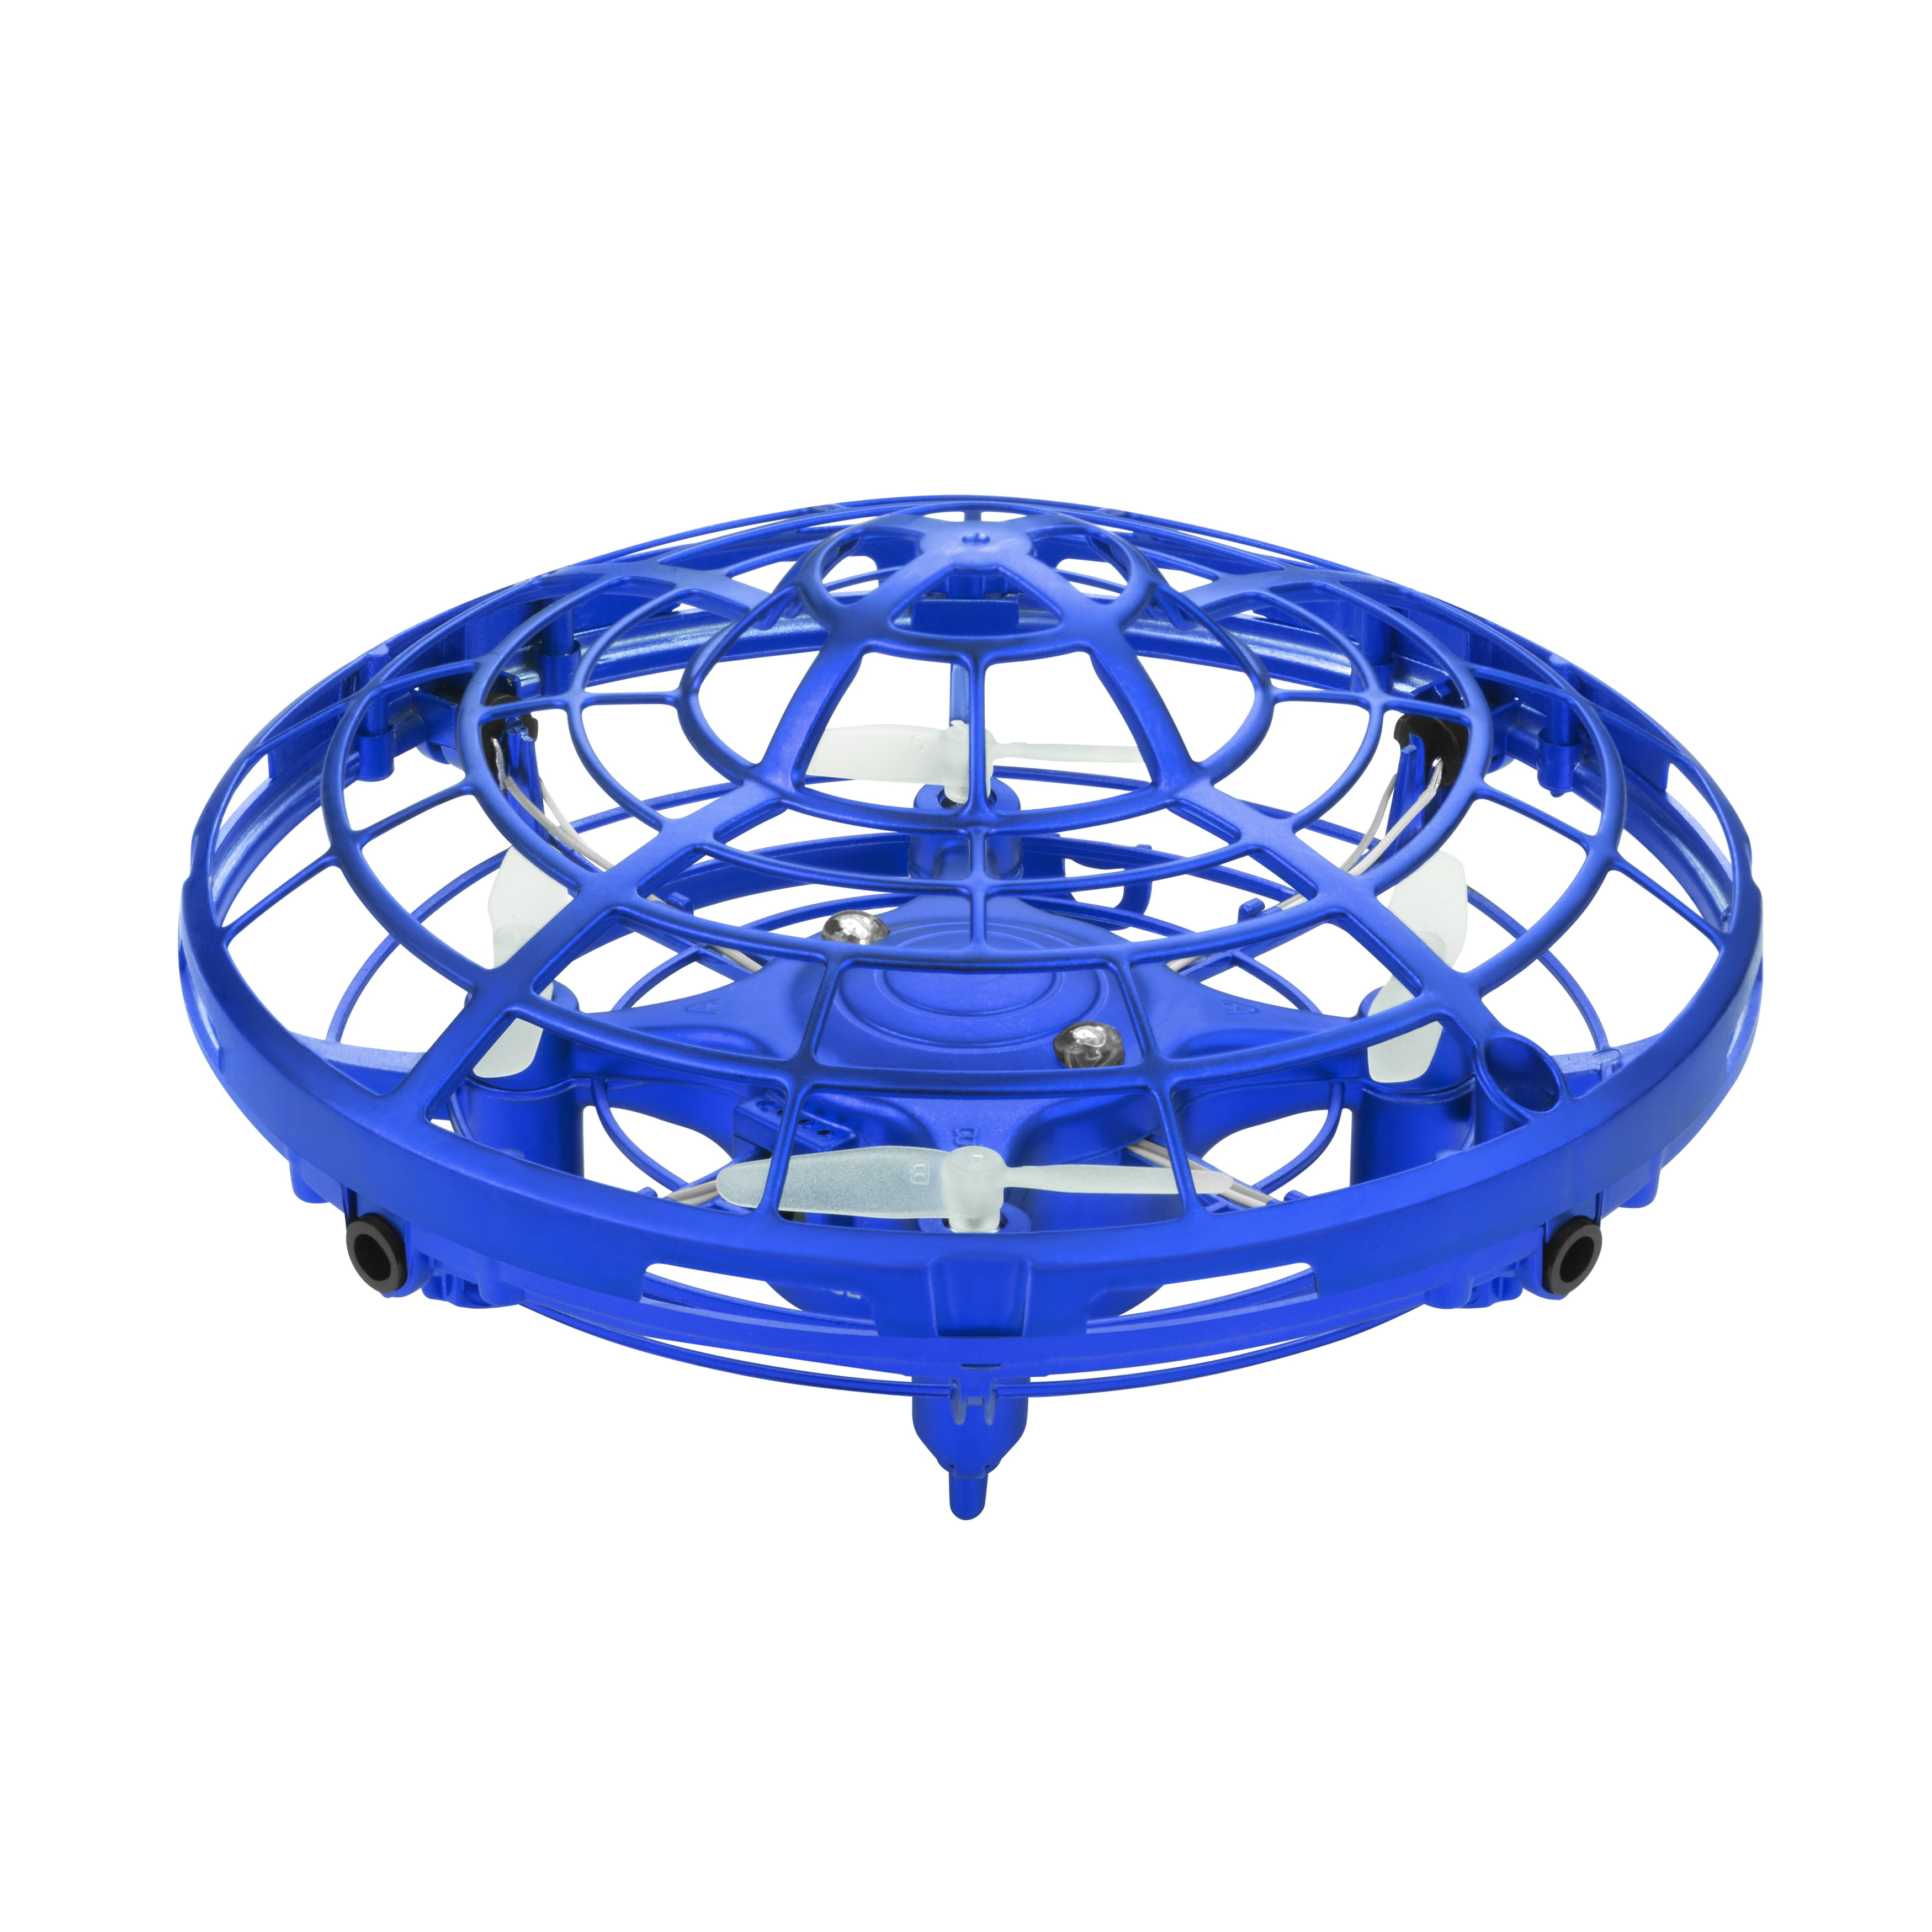 The Original Hover Star Motion Controlled UFO Toy Blue Ages 6 Super-easy for sale online 